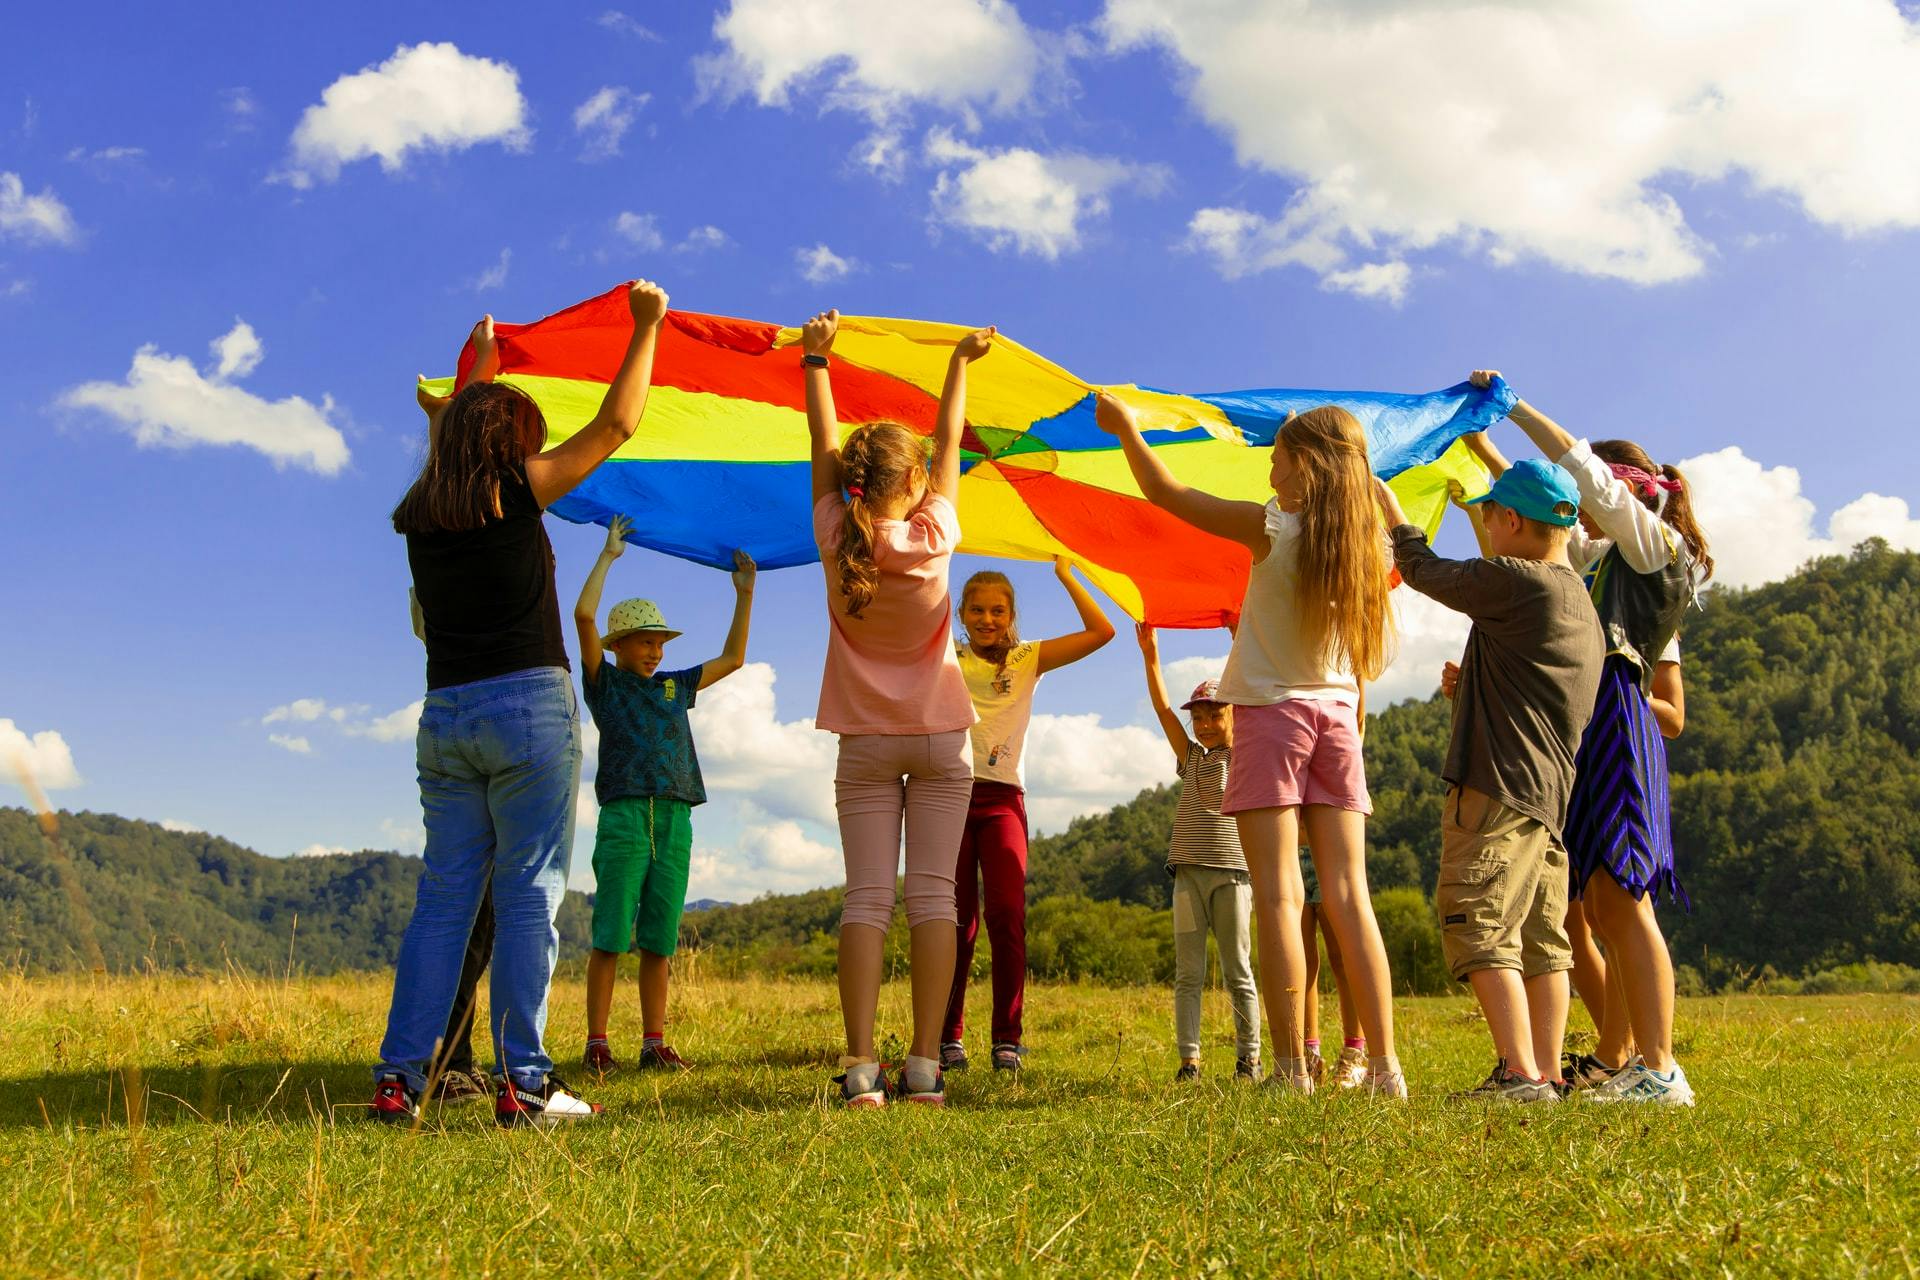 A group of students stands outside holding a colorful circle of fabric as they play active classroom games. 